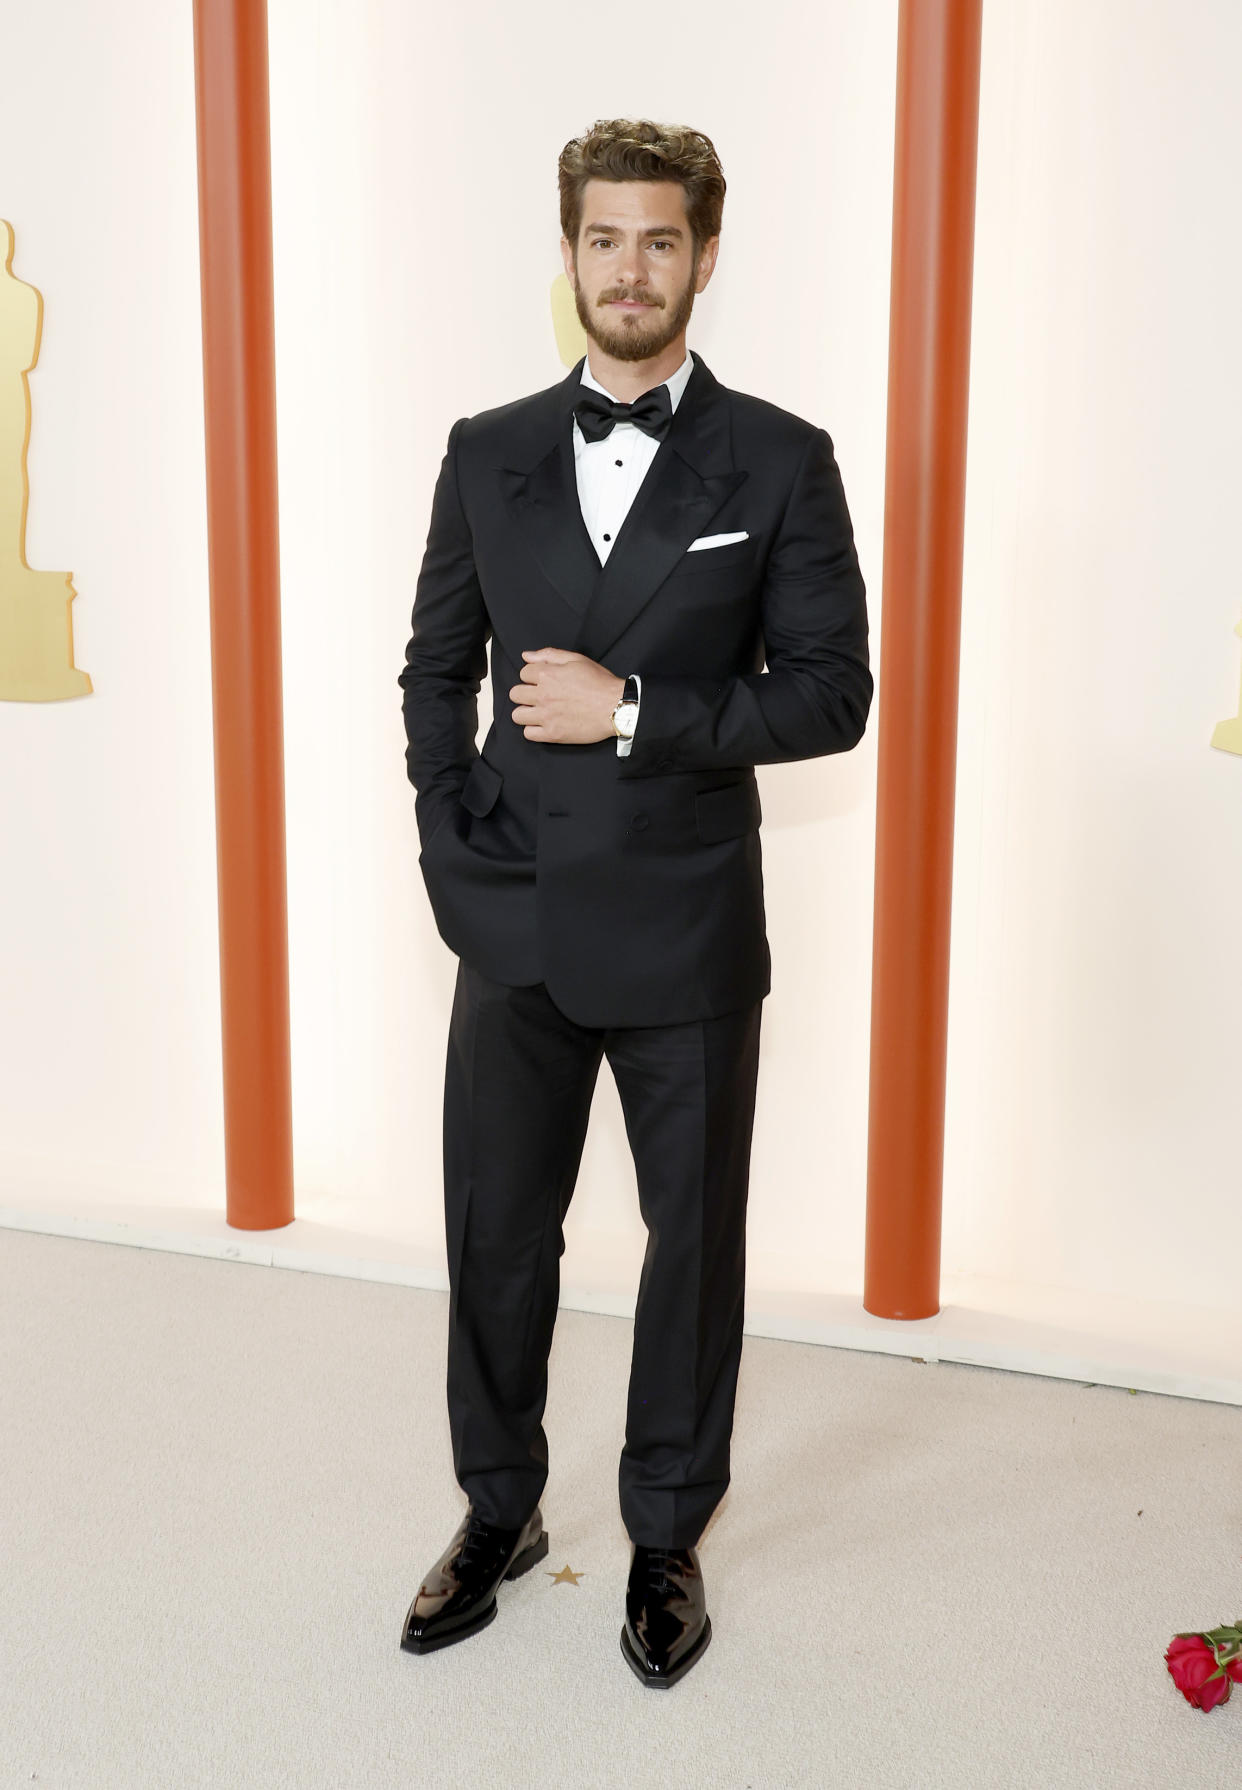 HOLLYWOOD, CALIFORNIA - MARCH 12: Andrew Garfield attends the 95th Annual Academy Awards on March 12, 2023 in Hollywood, California. (Photo by Mike Coppola/Getty Images)